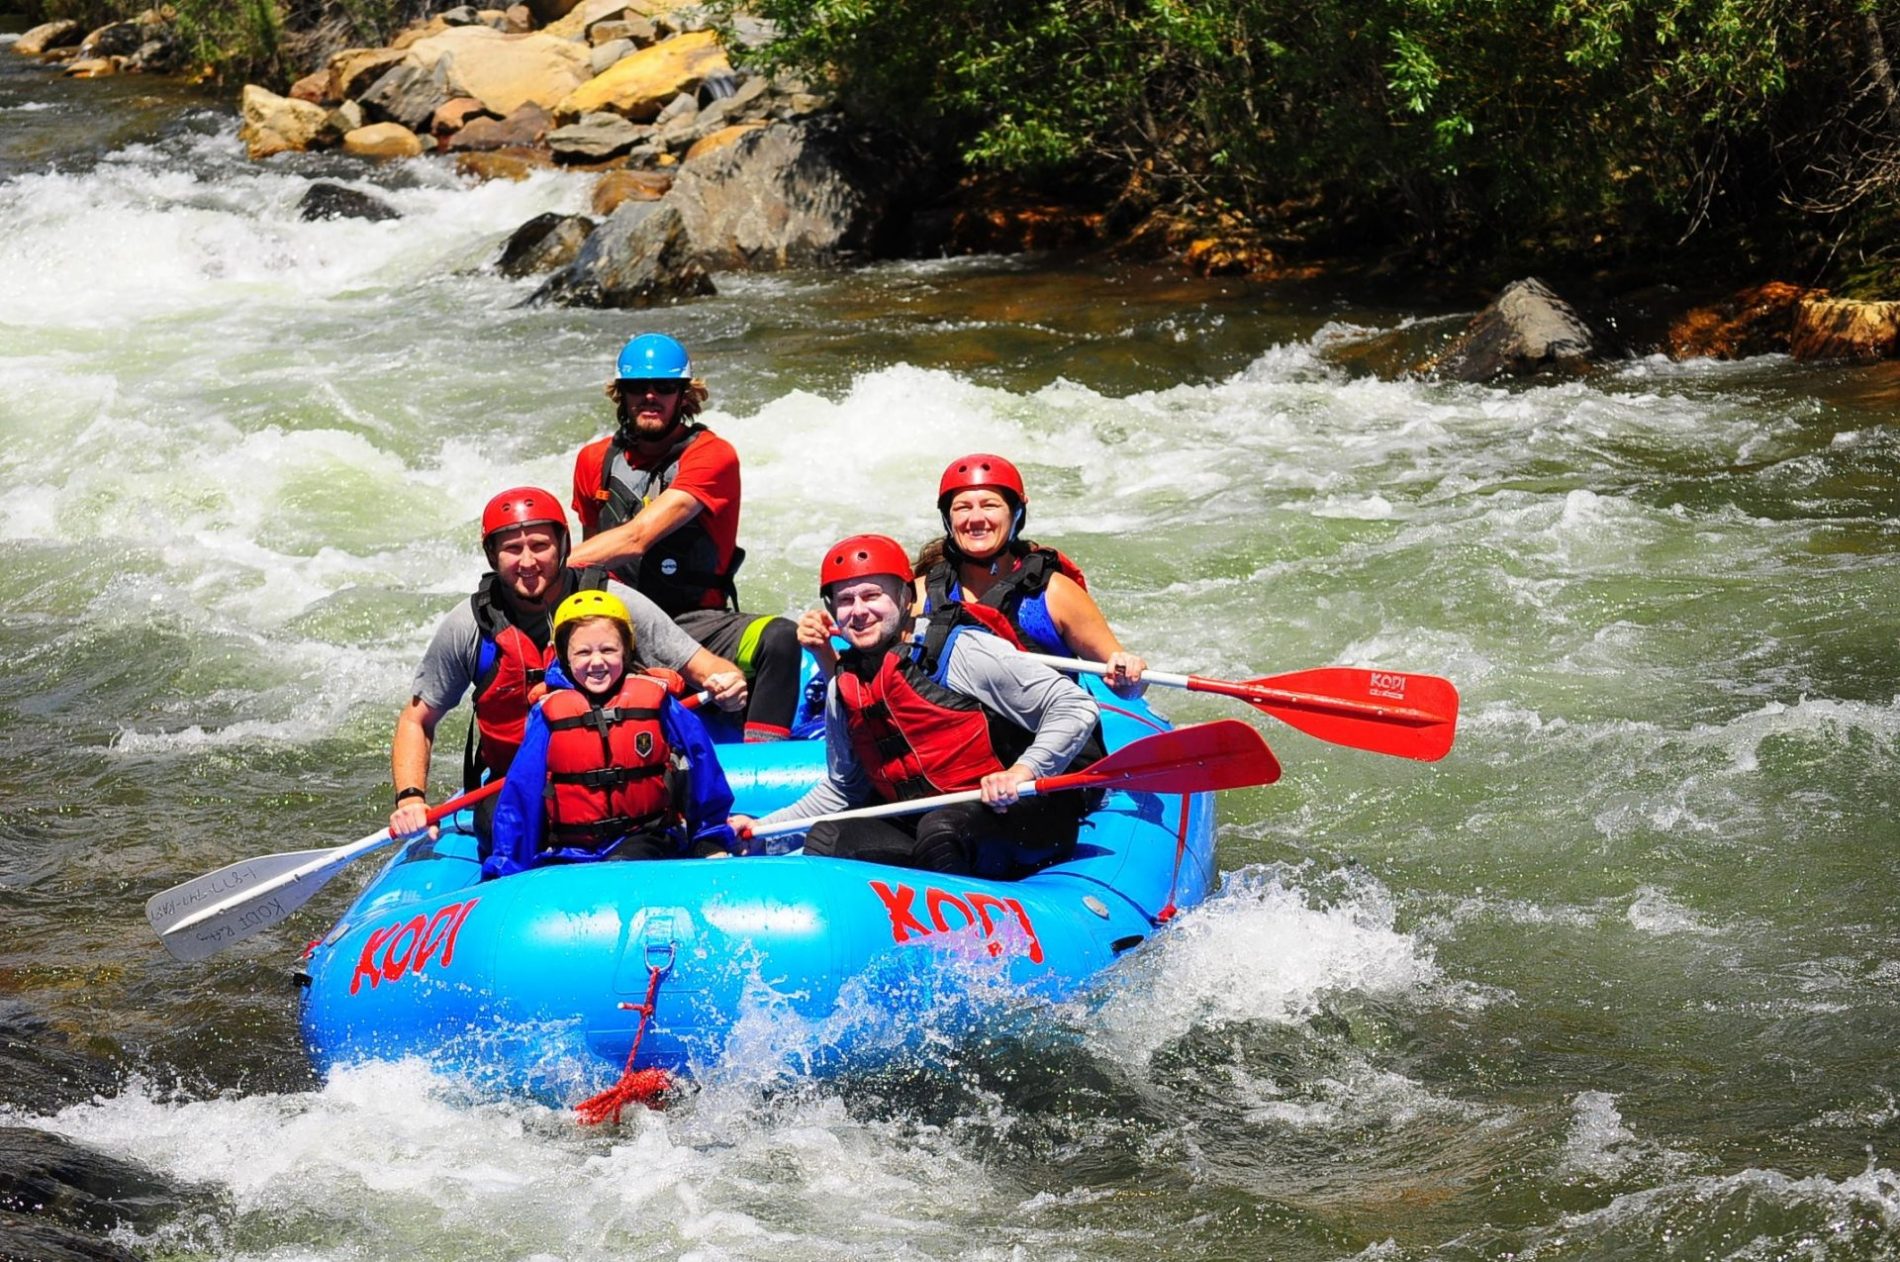 KODI Rafting's blue inflatable boat on a tour with passengers in life jackets and helmets.